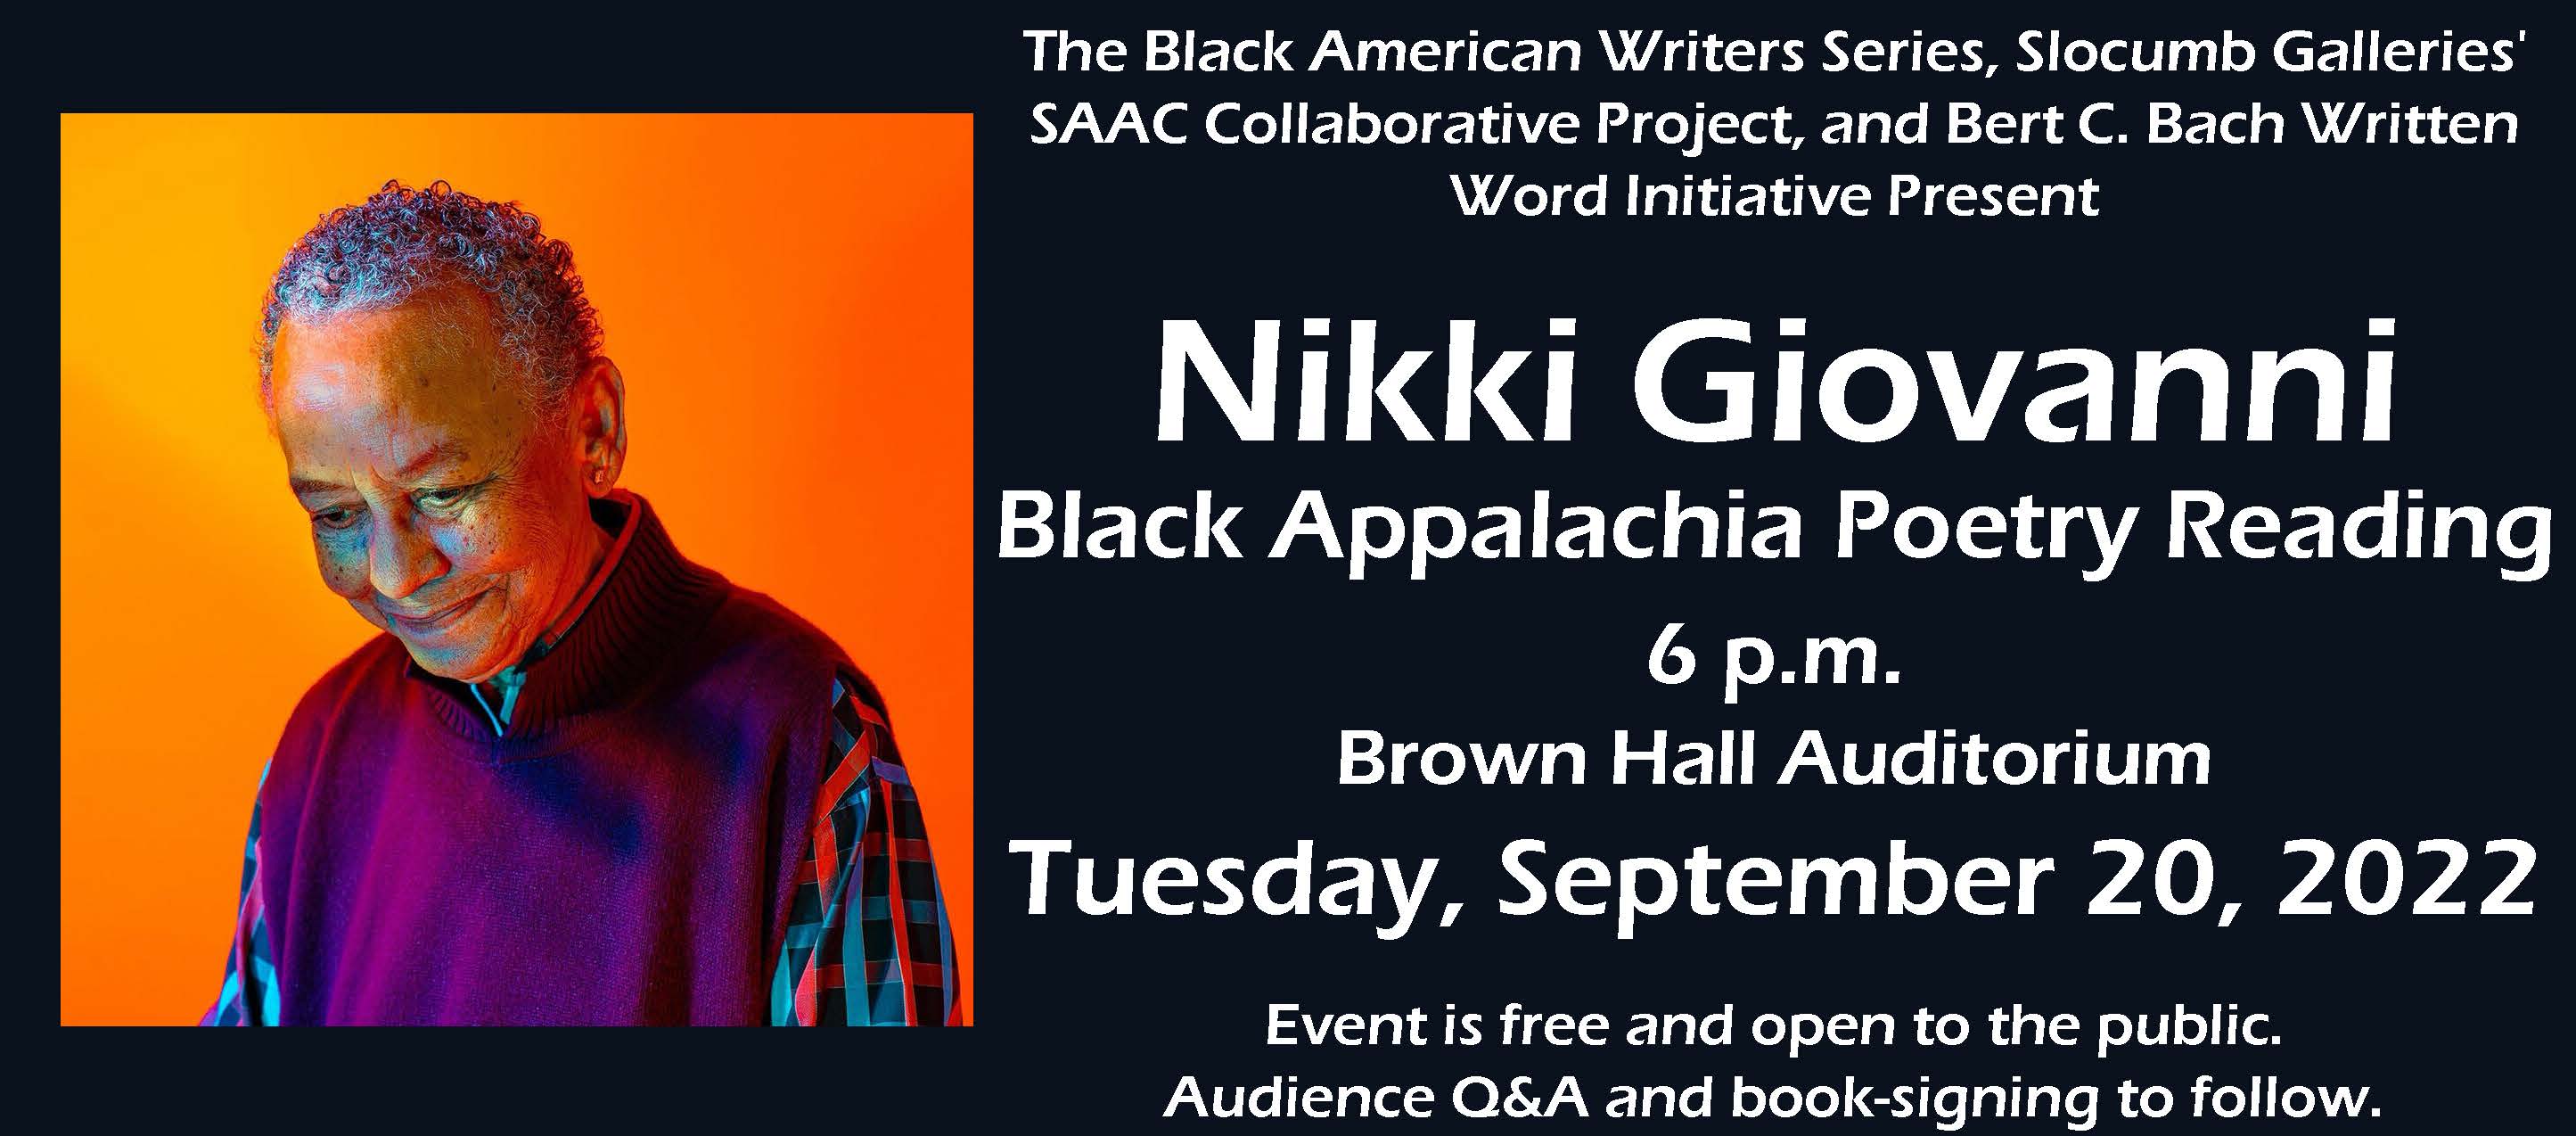 Photo of Nikki Giovanni on a black background with event information detailed in the caption.